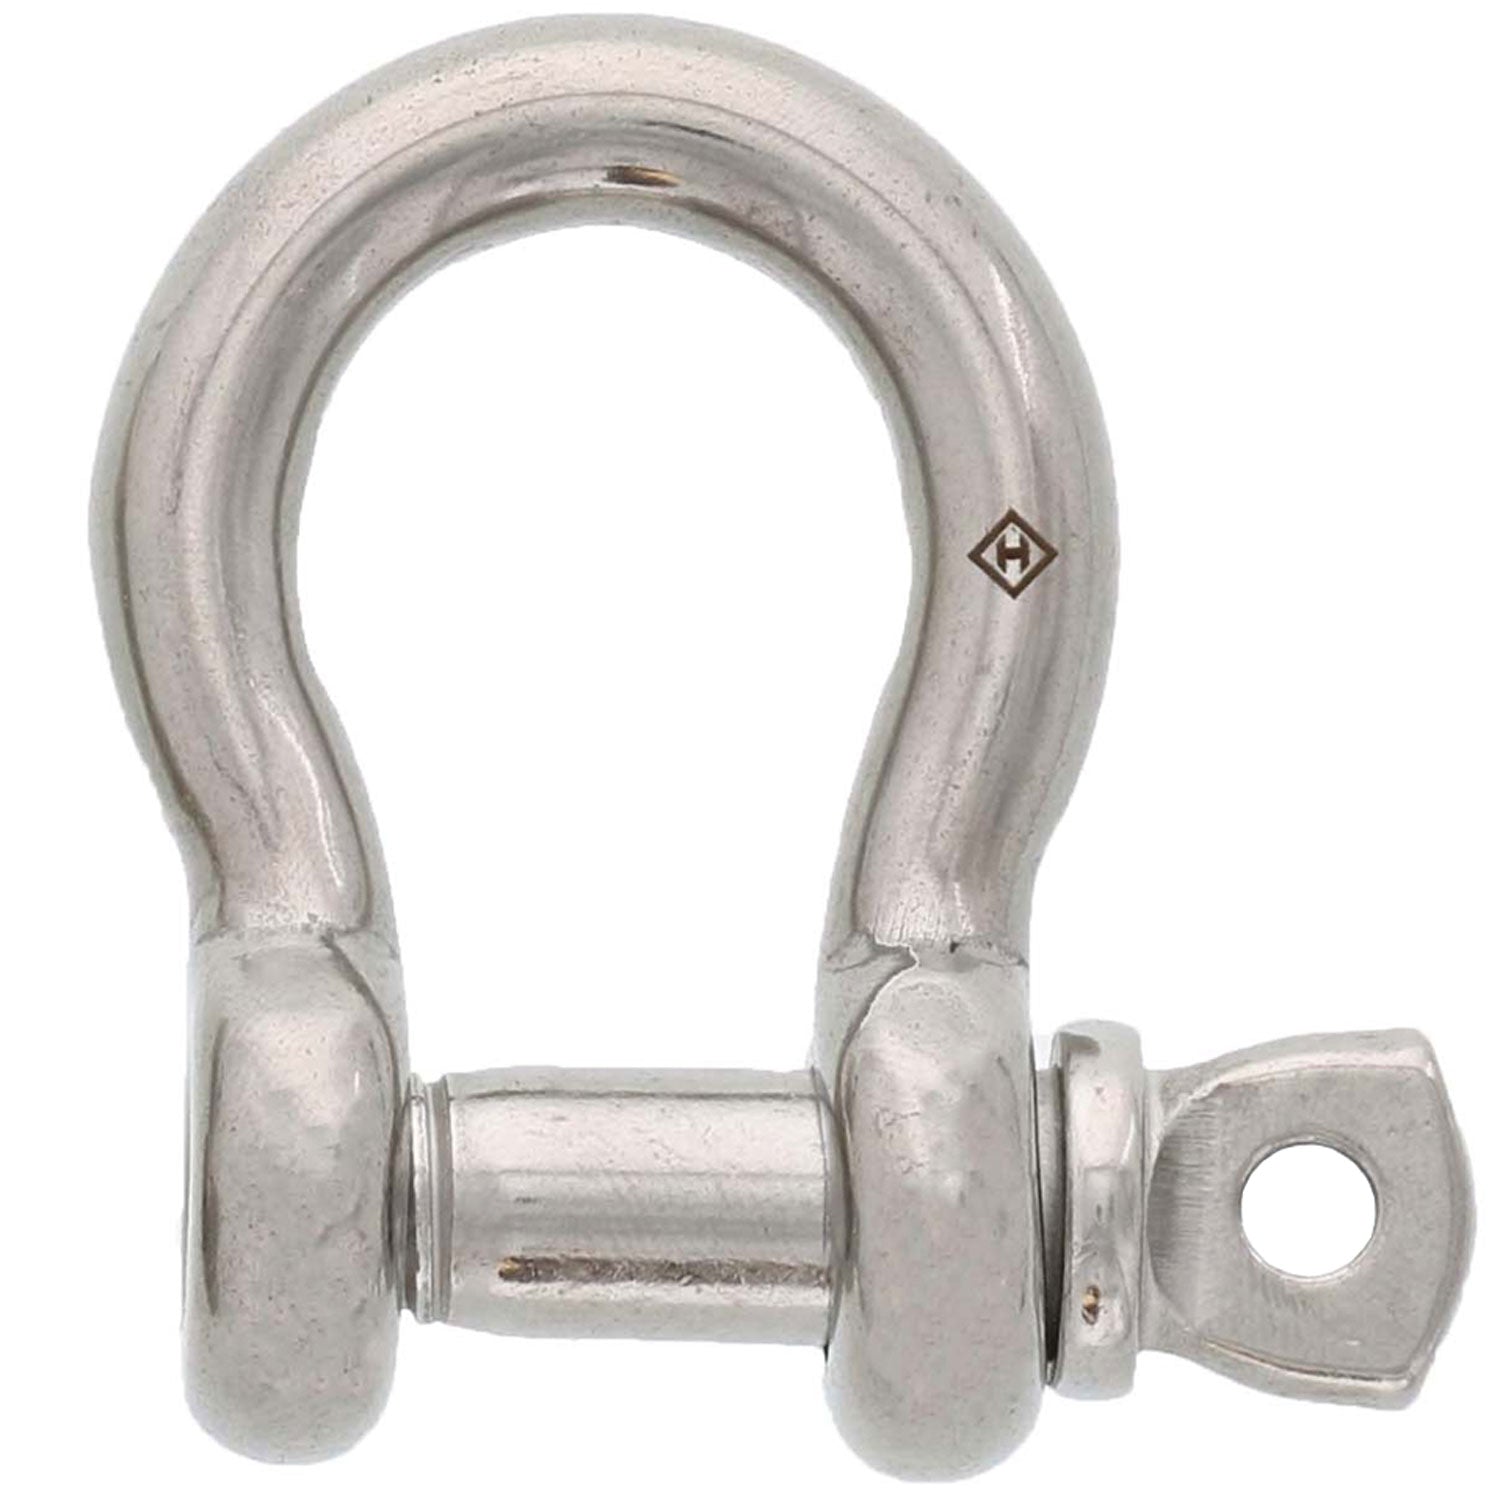 STRAIGHT SHACKLES WITH CAPTIVE SCREW EYE PIN.